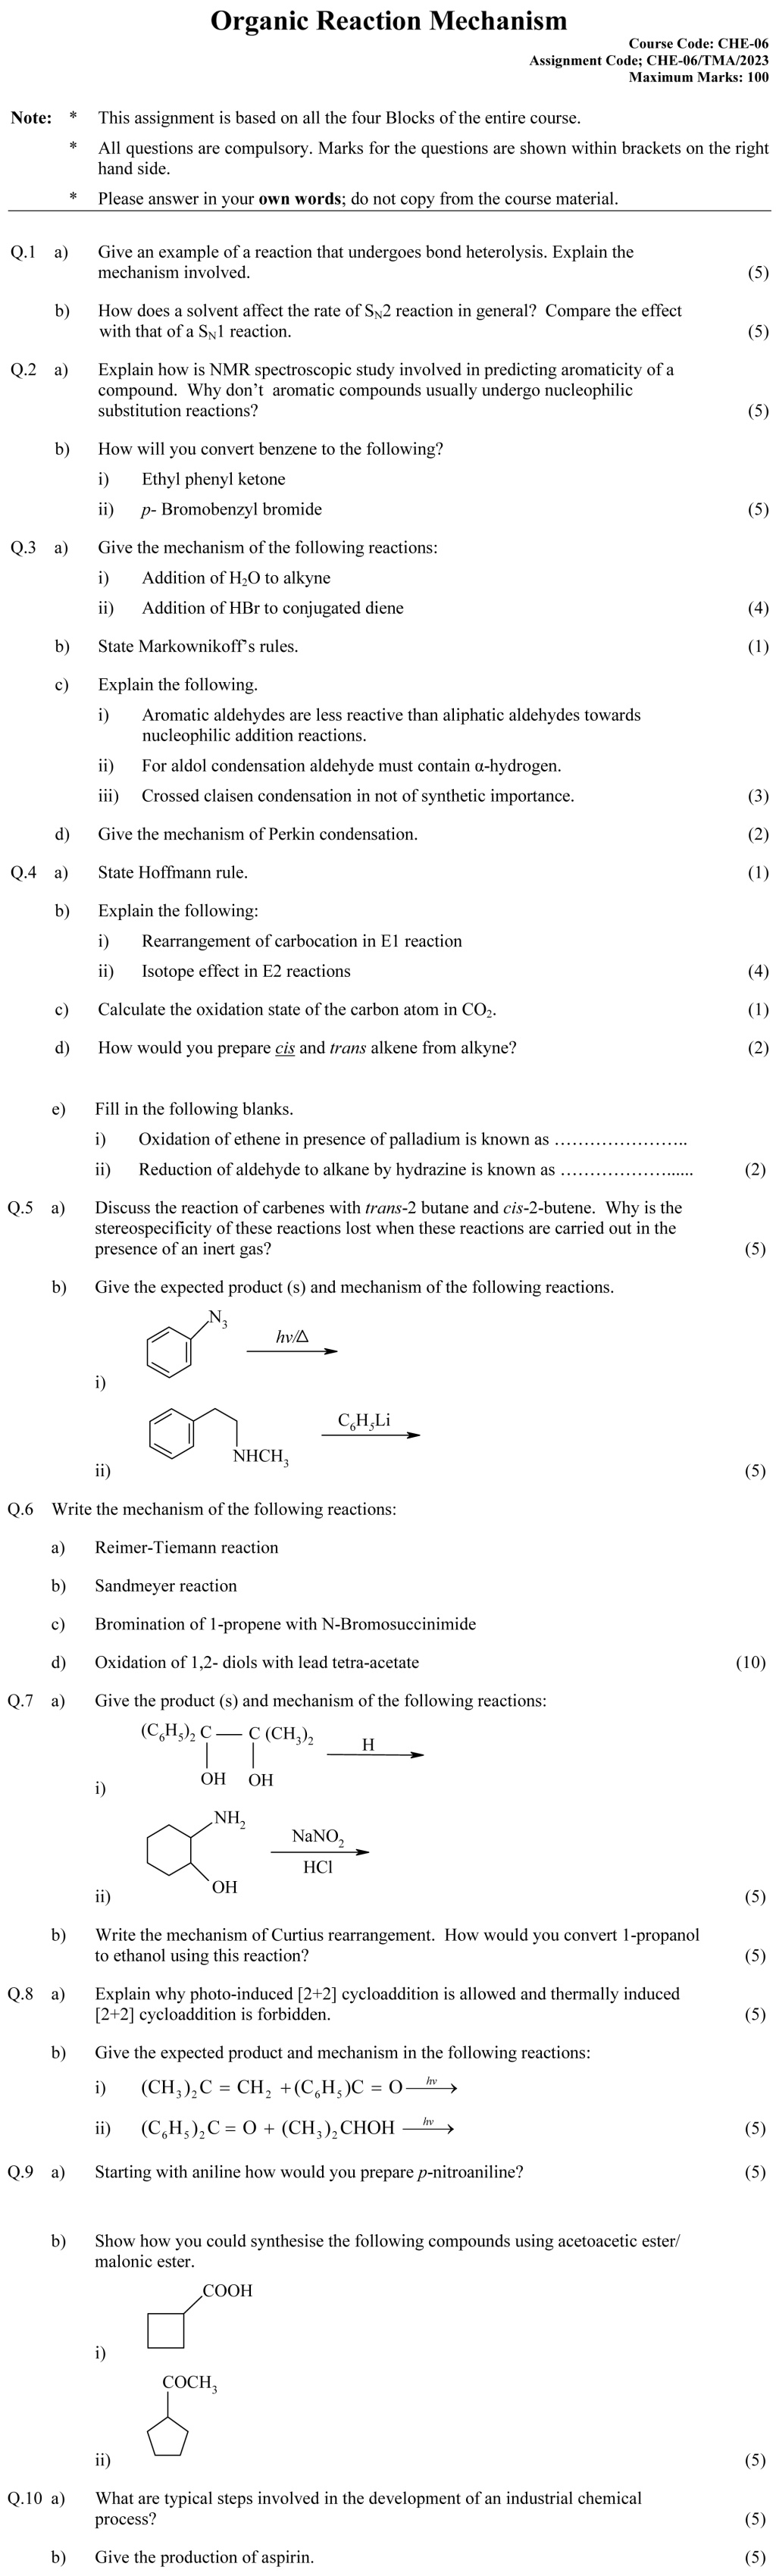 IGNOU CHE-06 - Organic Reaction Mechanism, Latest Solved Assignment-January 2023 - December 2023